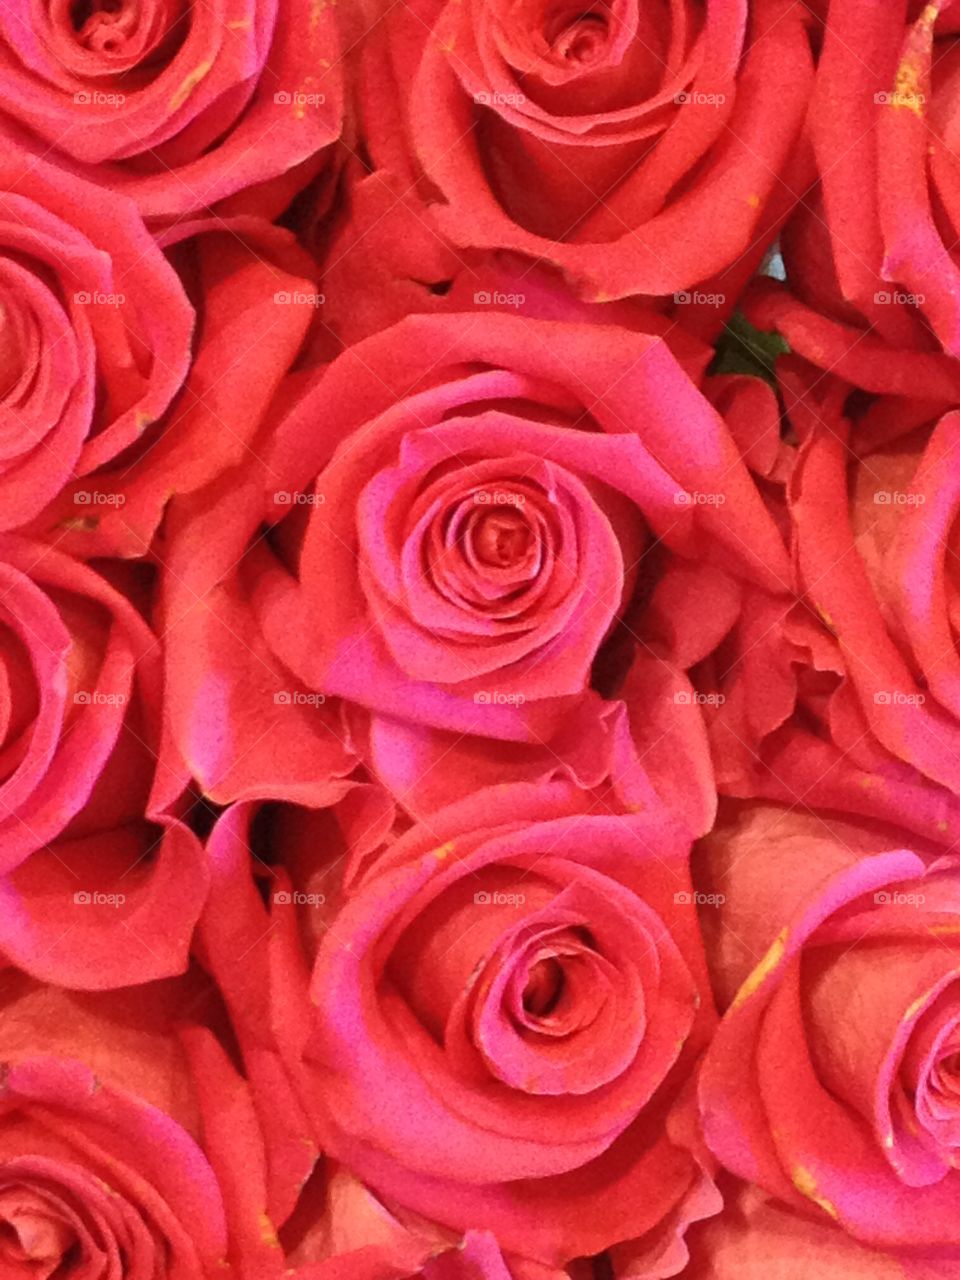 All Rosy. Taking the time to smell and capture the beautiful roses in a bouquet at my local market